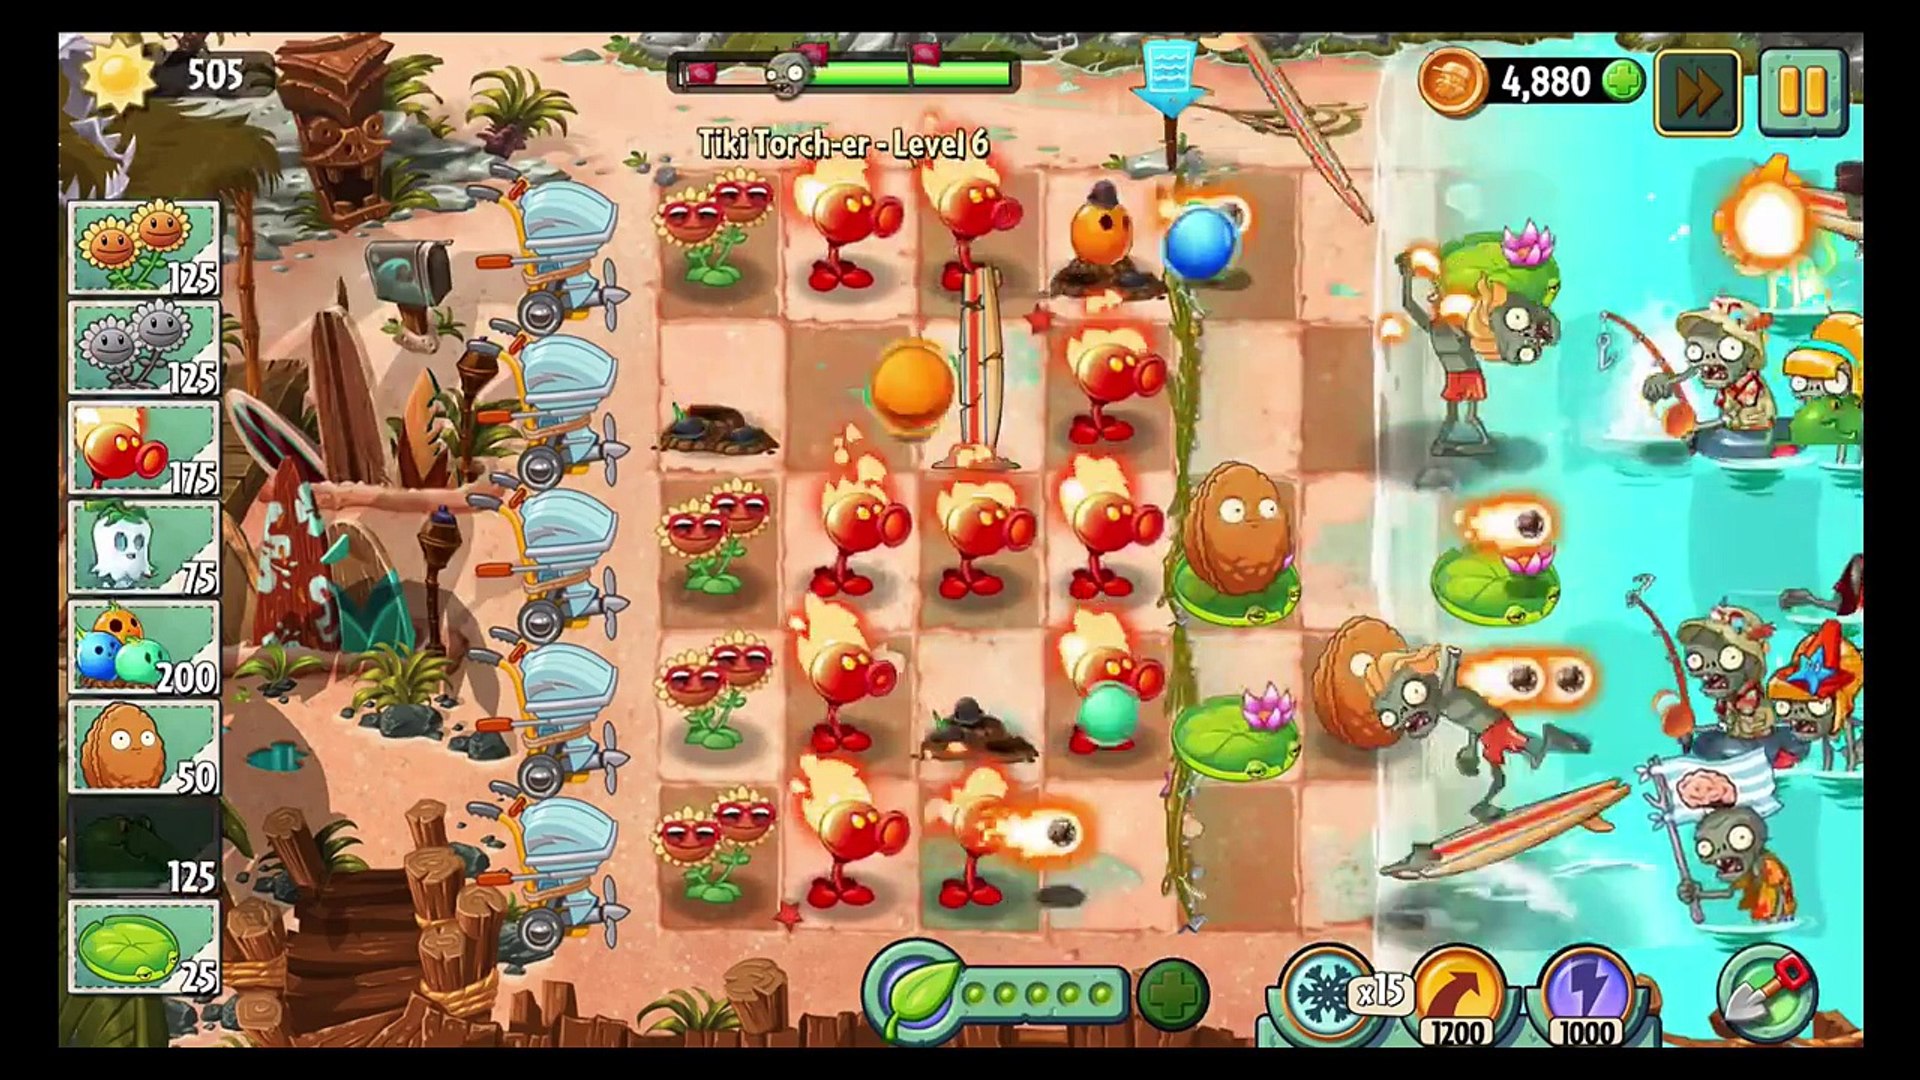 Plants vs. Zombies 2: It's About Time - Gameplay Walkthrough Part 278 -  Tiki Torch-er! (iOS) 